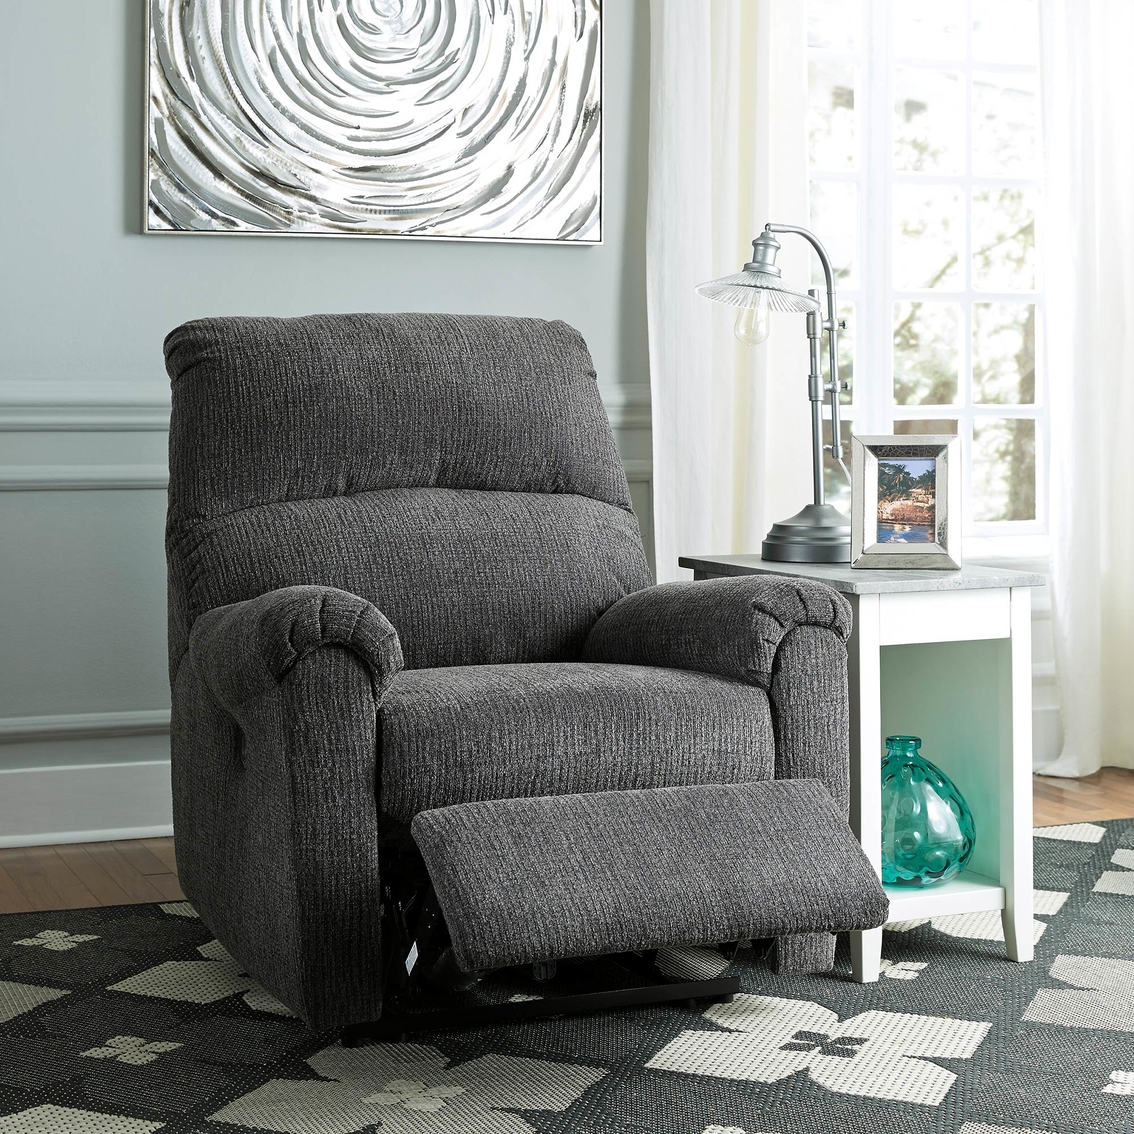 Signature Design by Ashley McTeer Power Recliner - Image 4 of 5